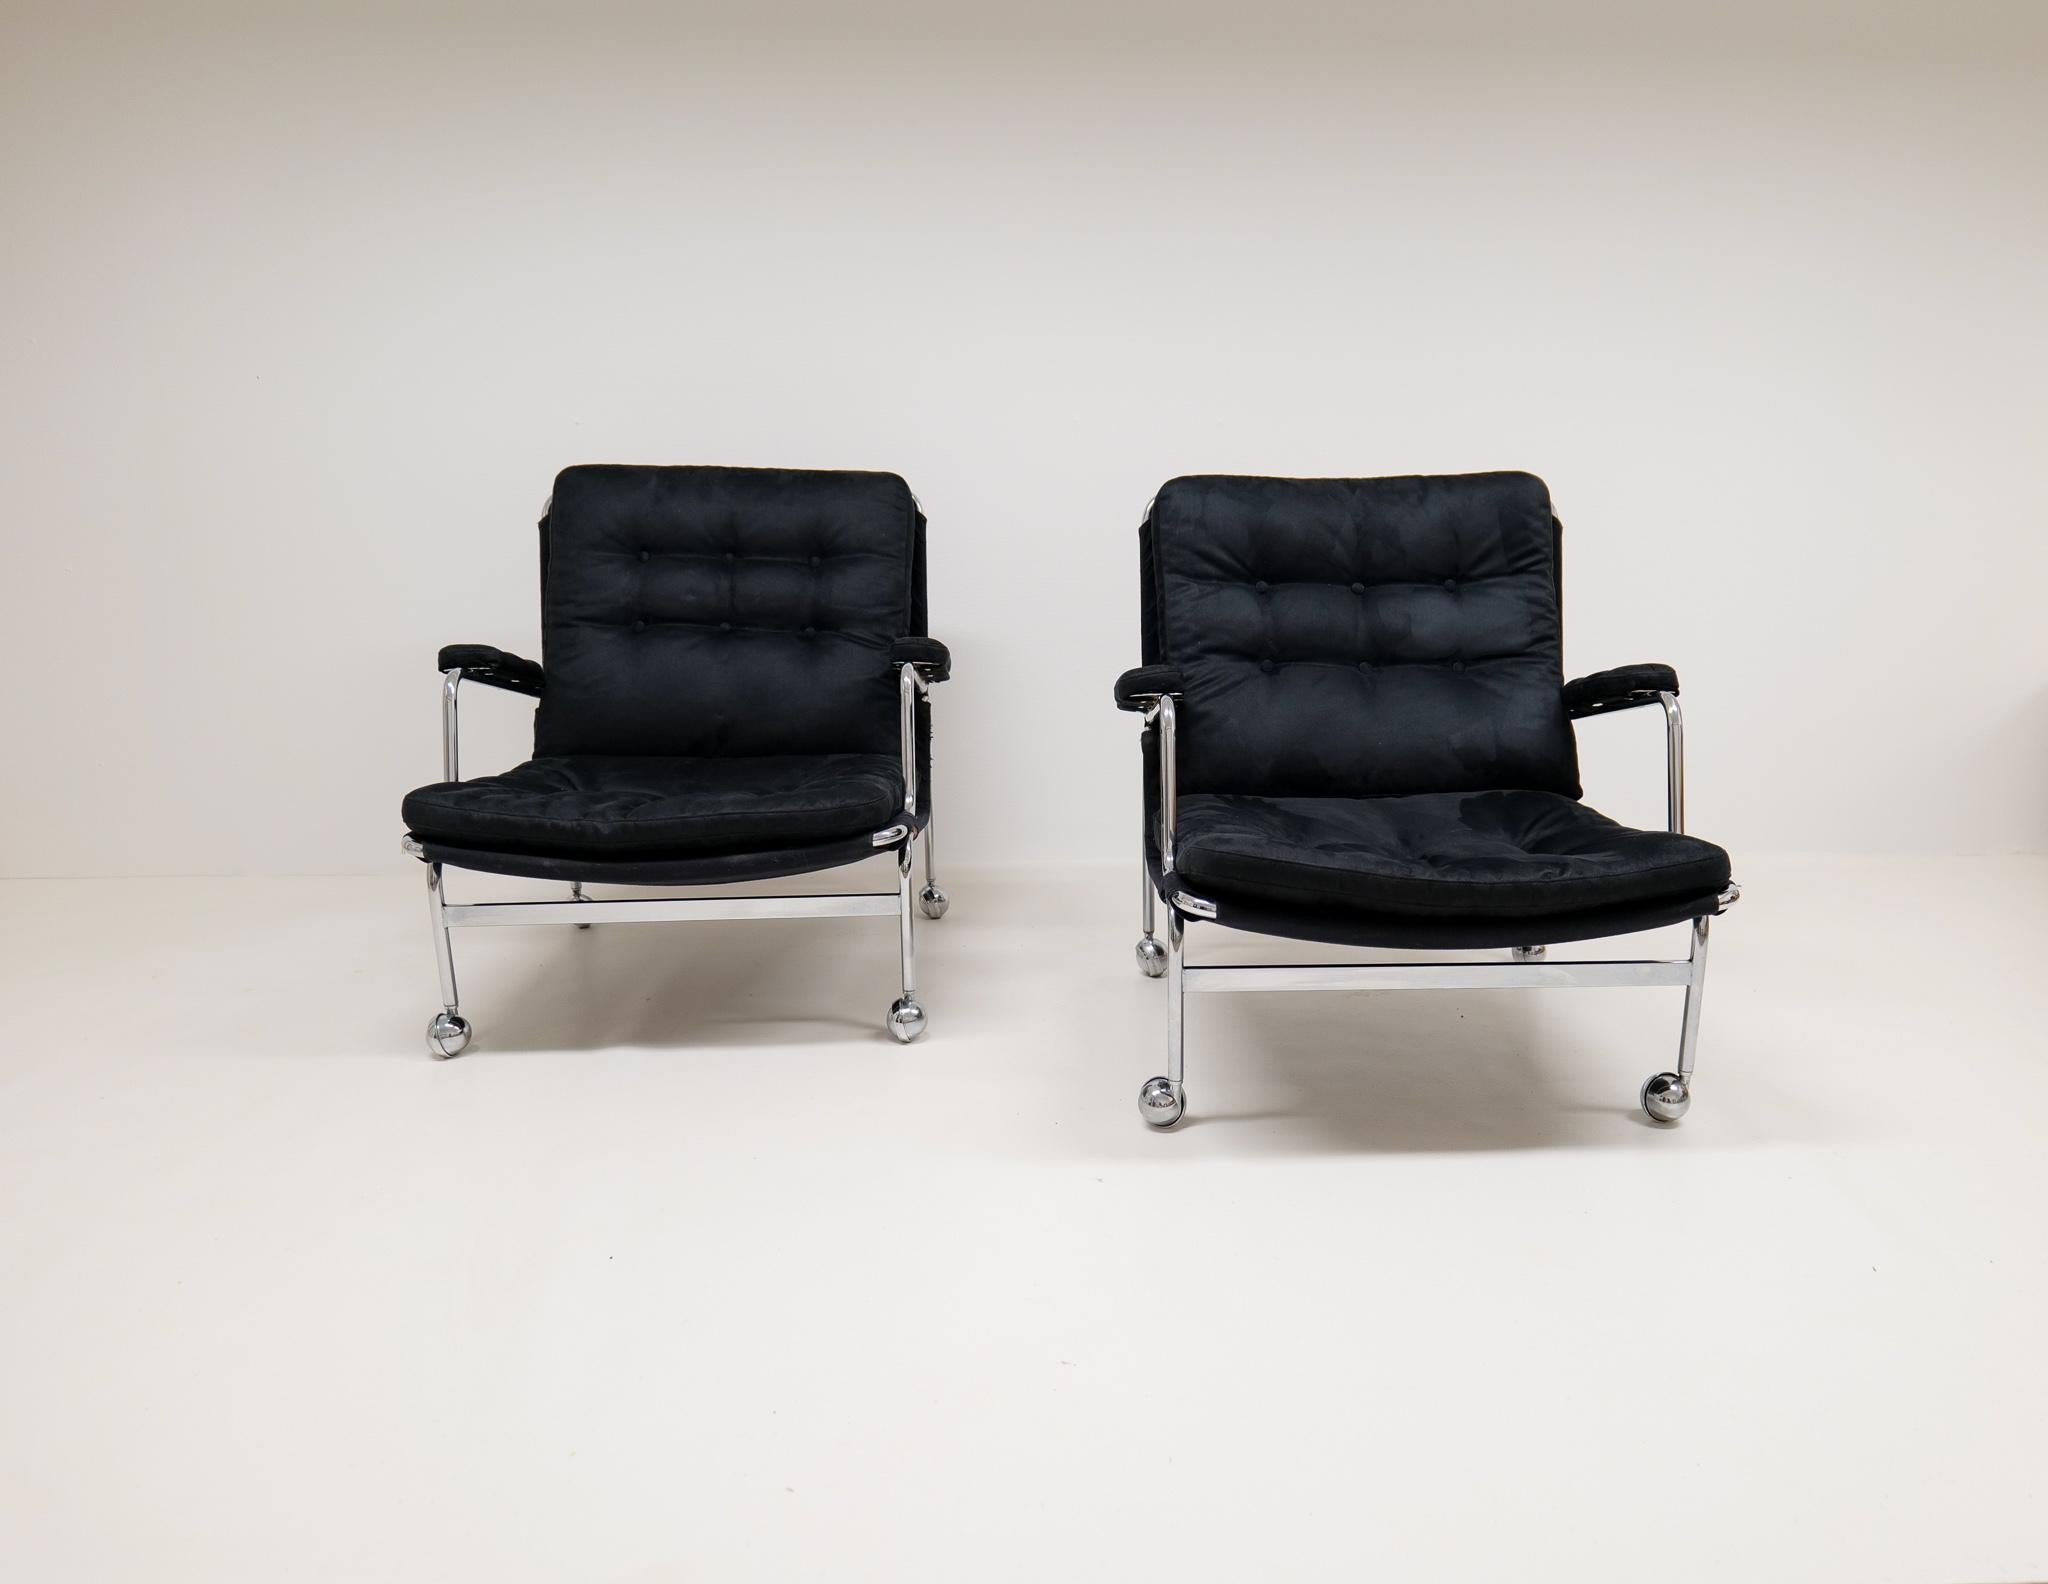 A pair of easy chairs made in 1969 at the Dux factory in Sweden and designed by famous Swedish designer Bruno Mathsson. These ones with tubular chromed steel with all new upholstery in suede. 

New upholstery, some wear on the chrome and on the